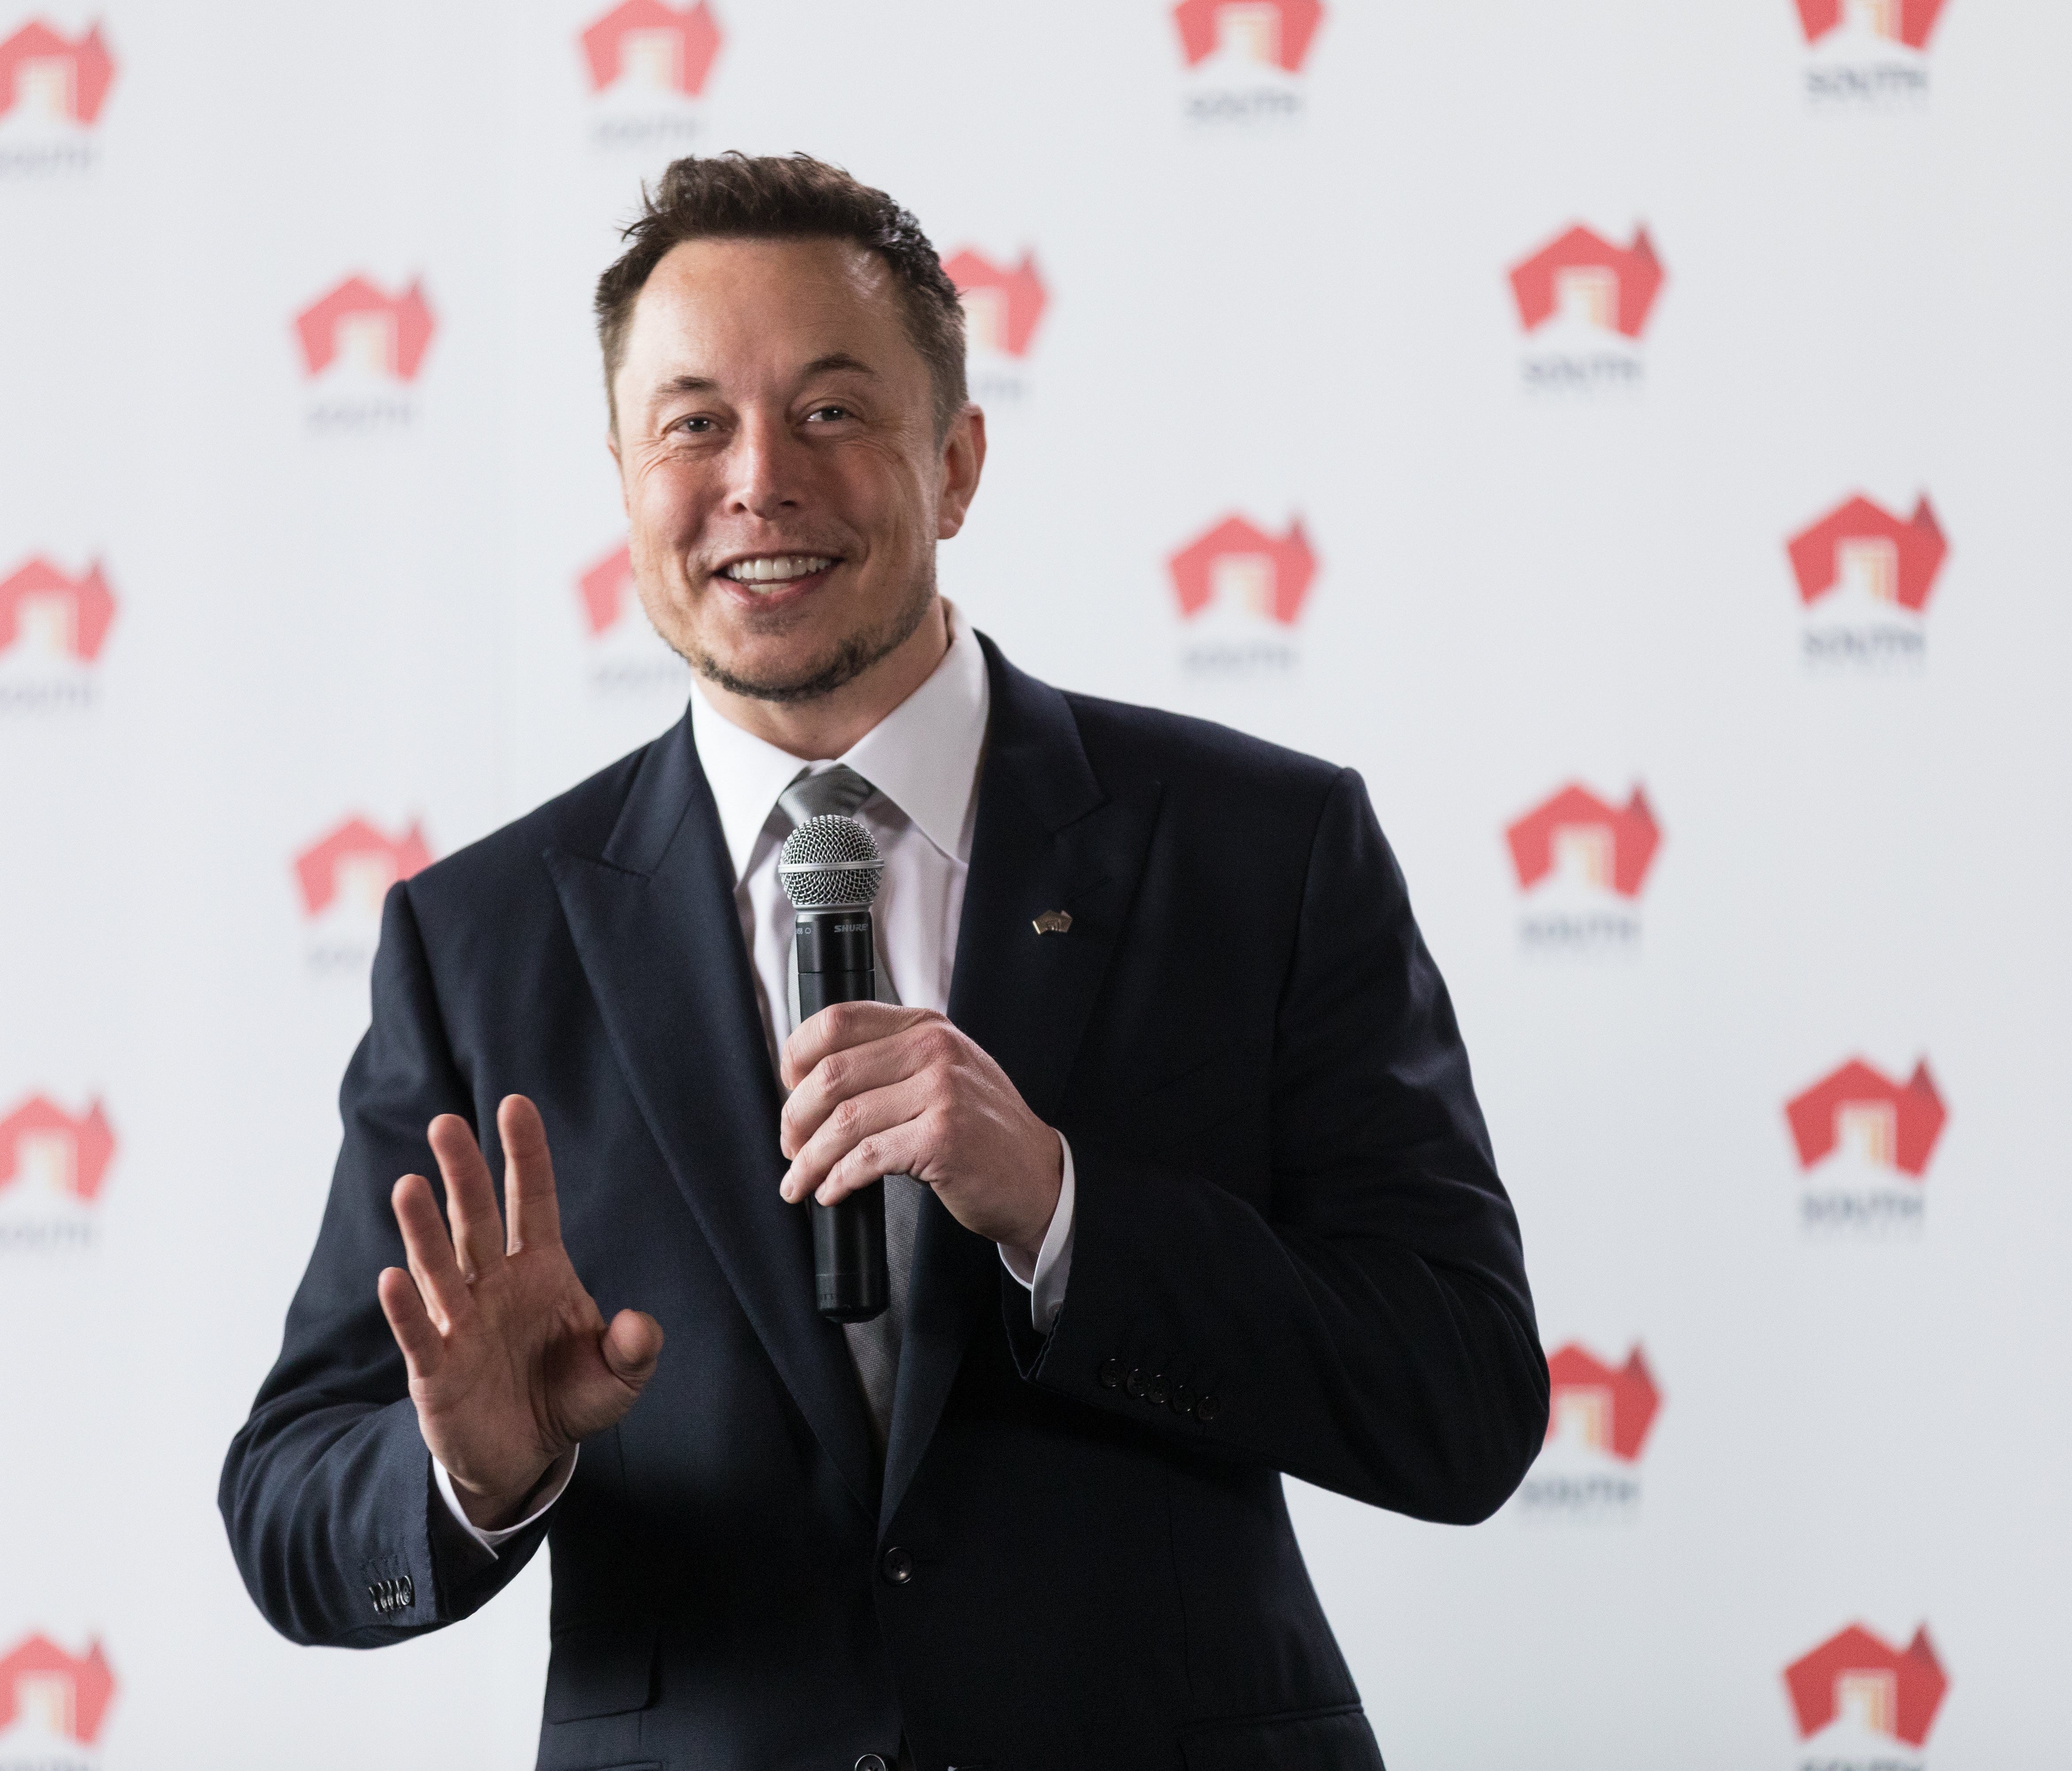 Tesla CEO Elon Musk speaks during a press conference at the Adelaide Oval in Adelaide, South Australia, Australia on July 7, 2017. Tesla will partner with French renewable energy developer Neoen to build the world's biggest Lithium Ion Battery, a 100